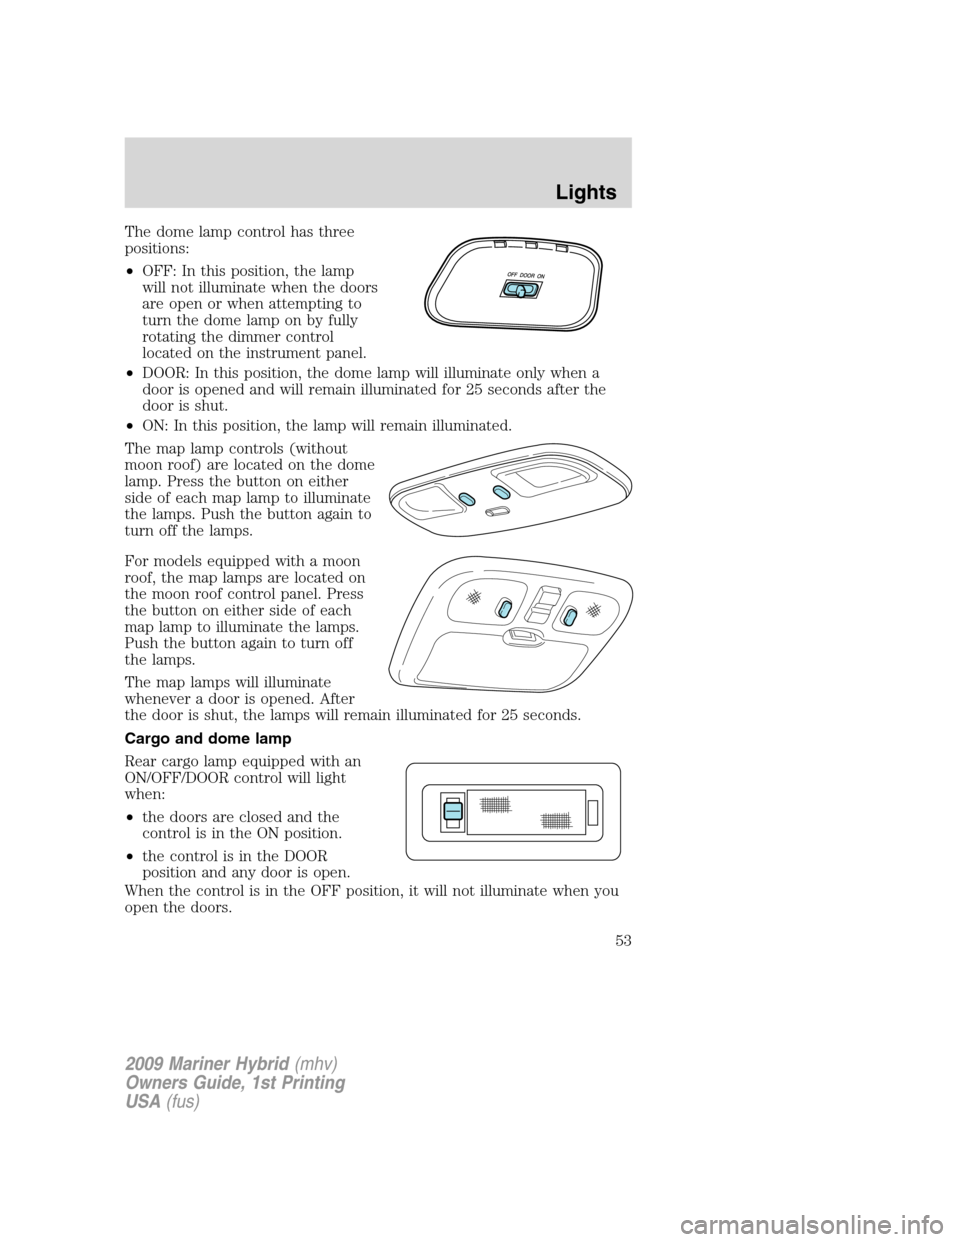 Mercury Mariner Hybrid 2009  Owners Manuals The dome lamp control has three
positions:
•OFF: In this position, the lamp
will not illuminate when the doors
are open or when attempting to
turn the dome lamp on by fully
rotating the dimmer contr